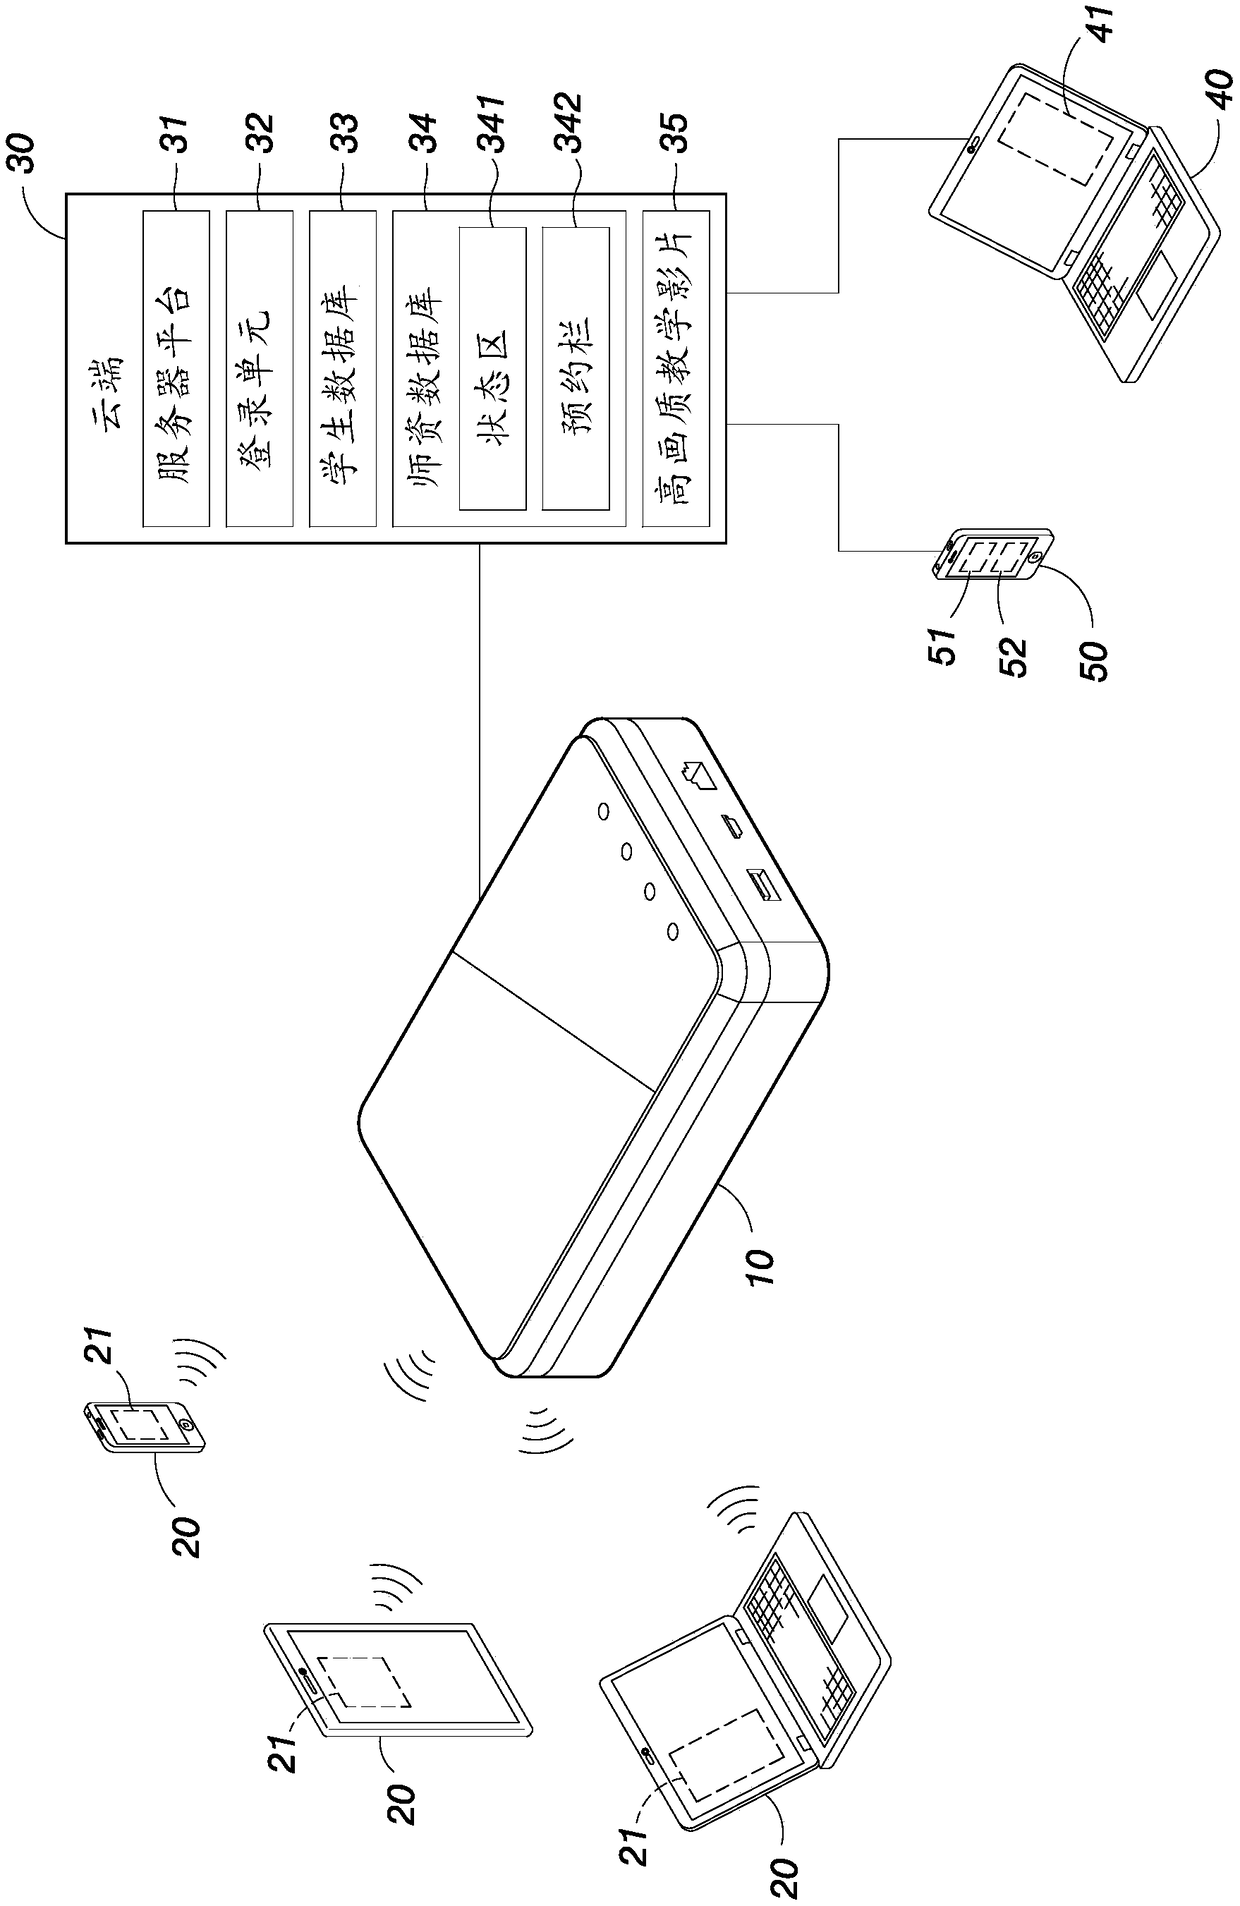 Online teaching match-making system applied to dual-interface learning device